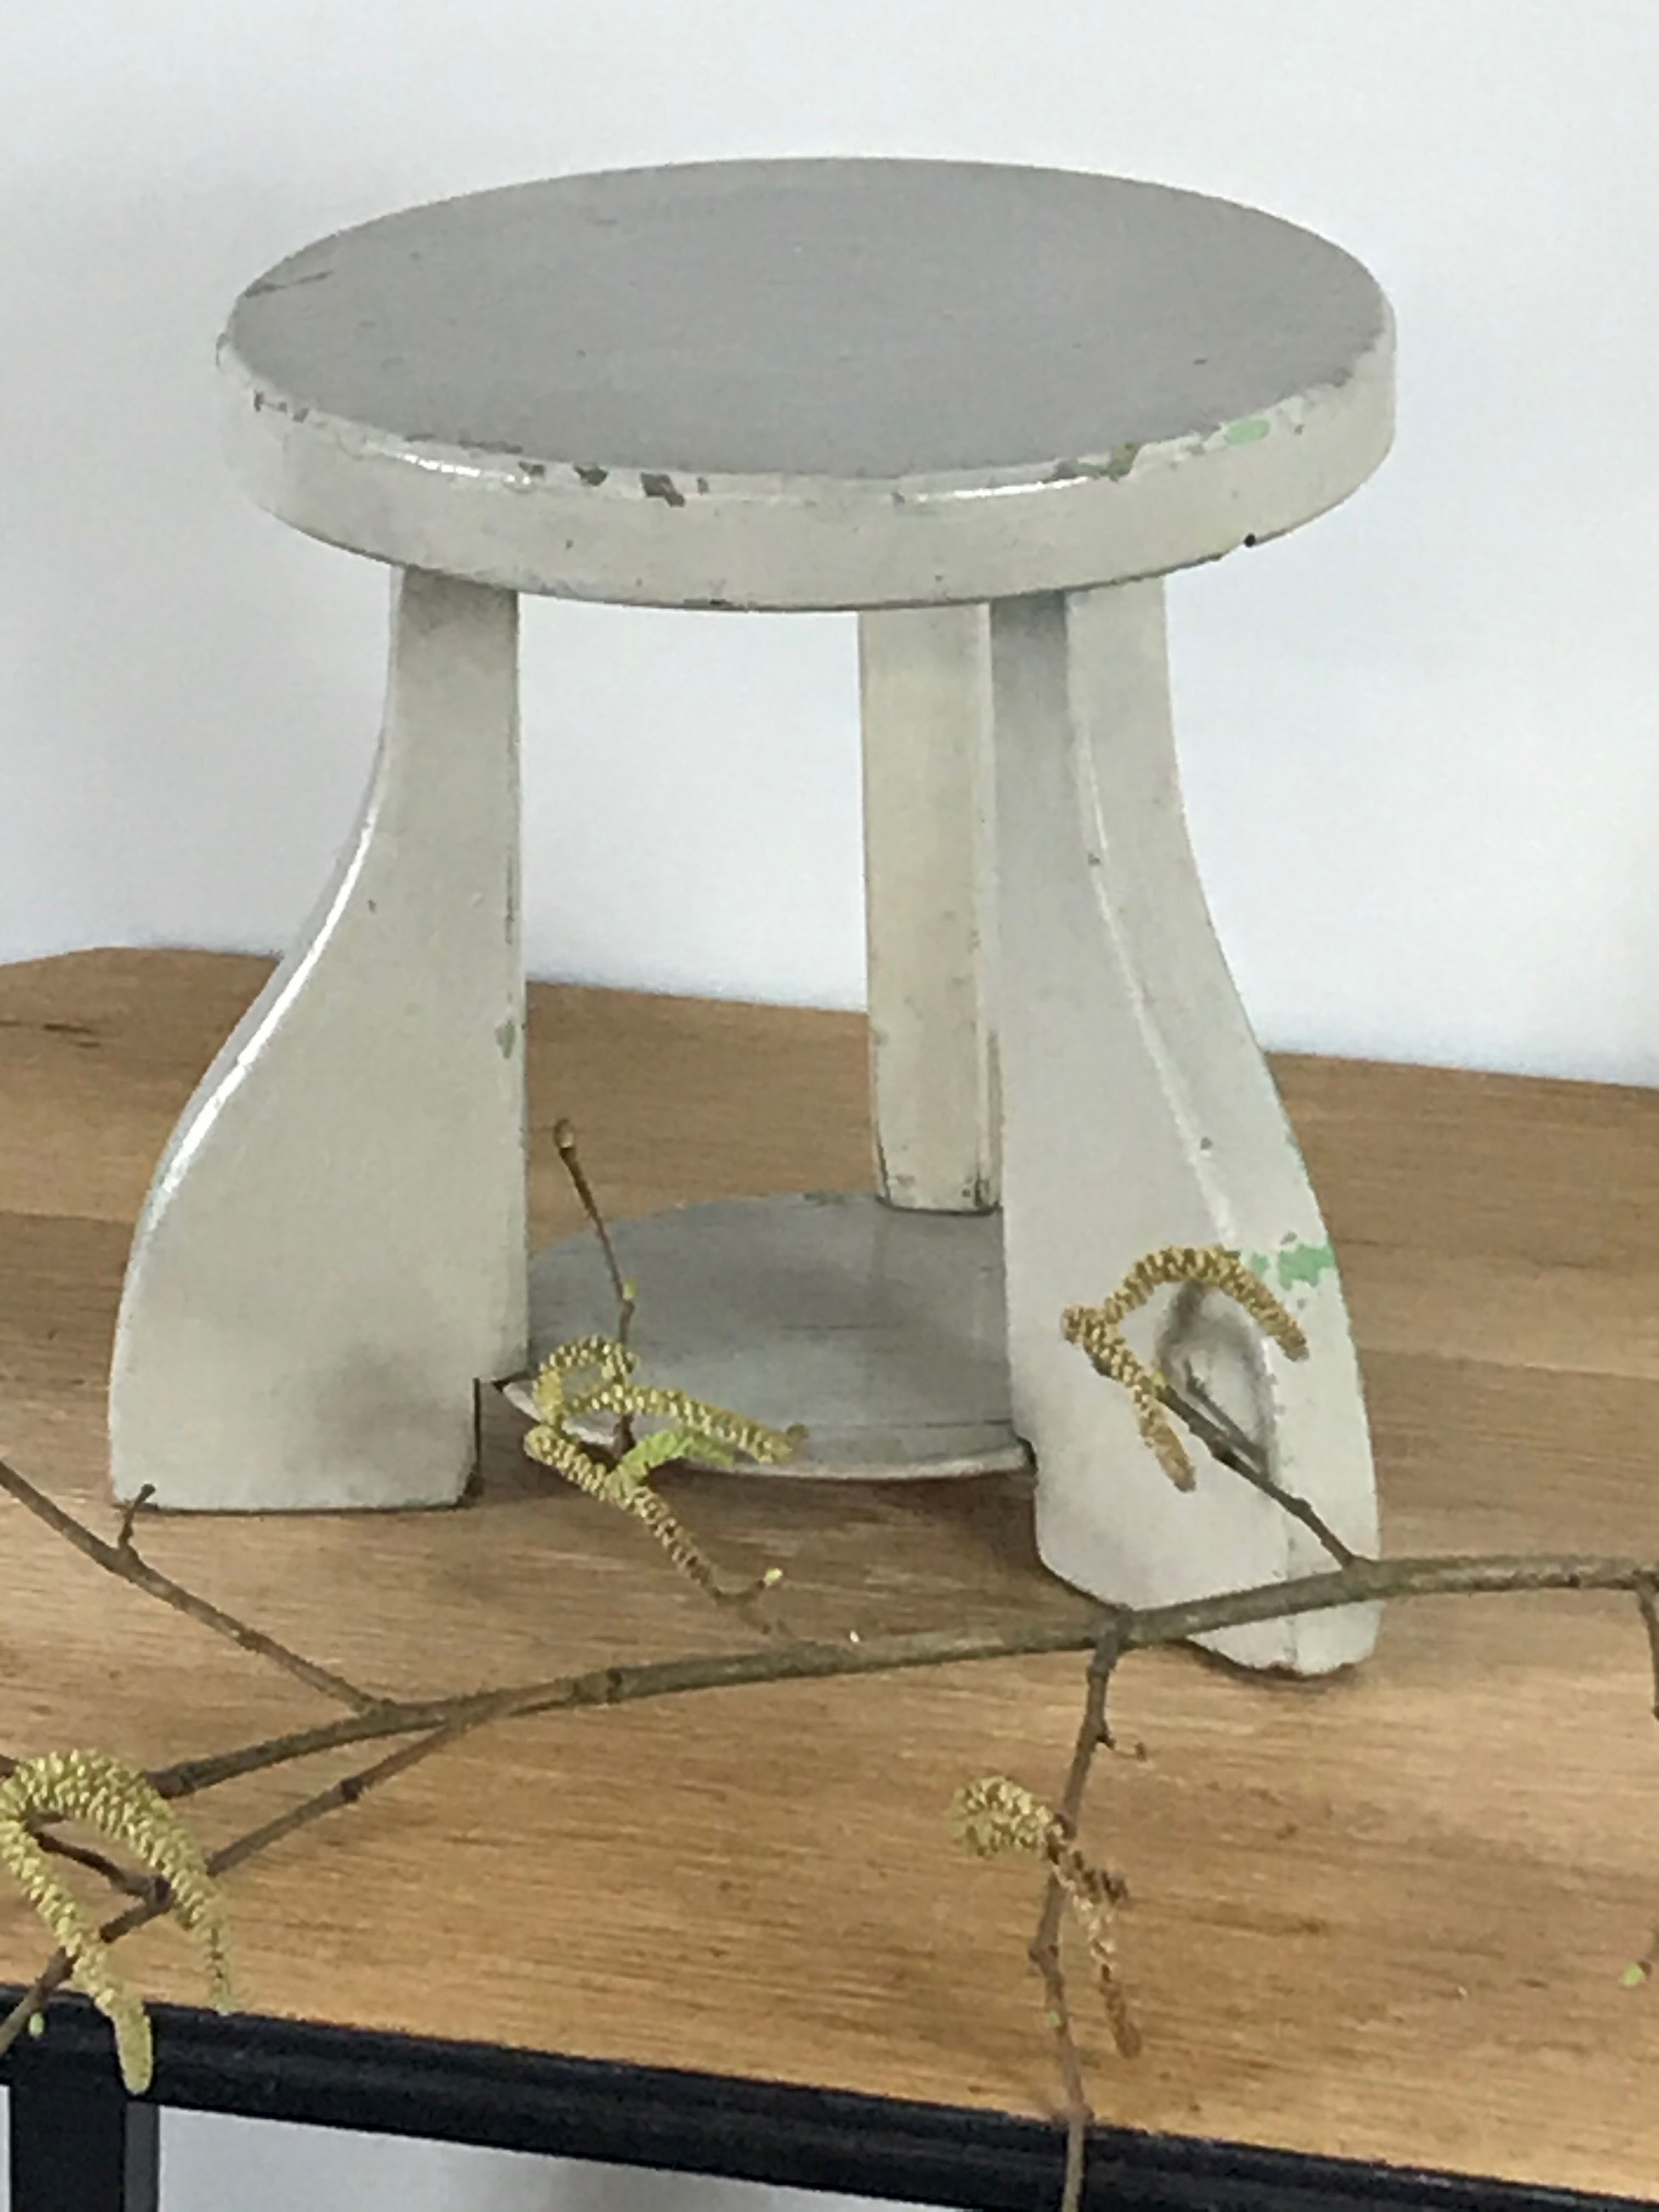 GREY WOODEN STAND